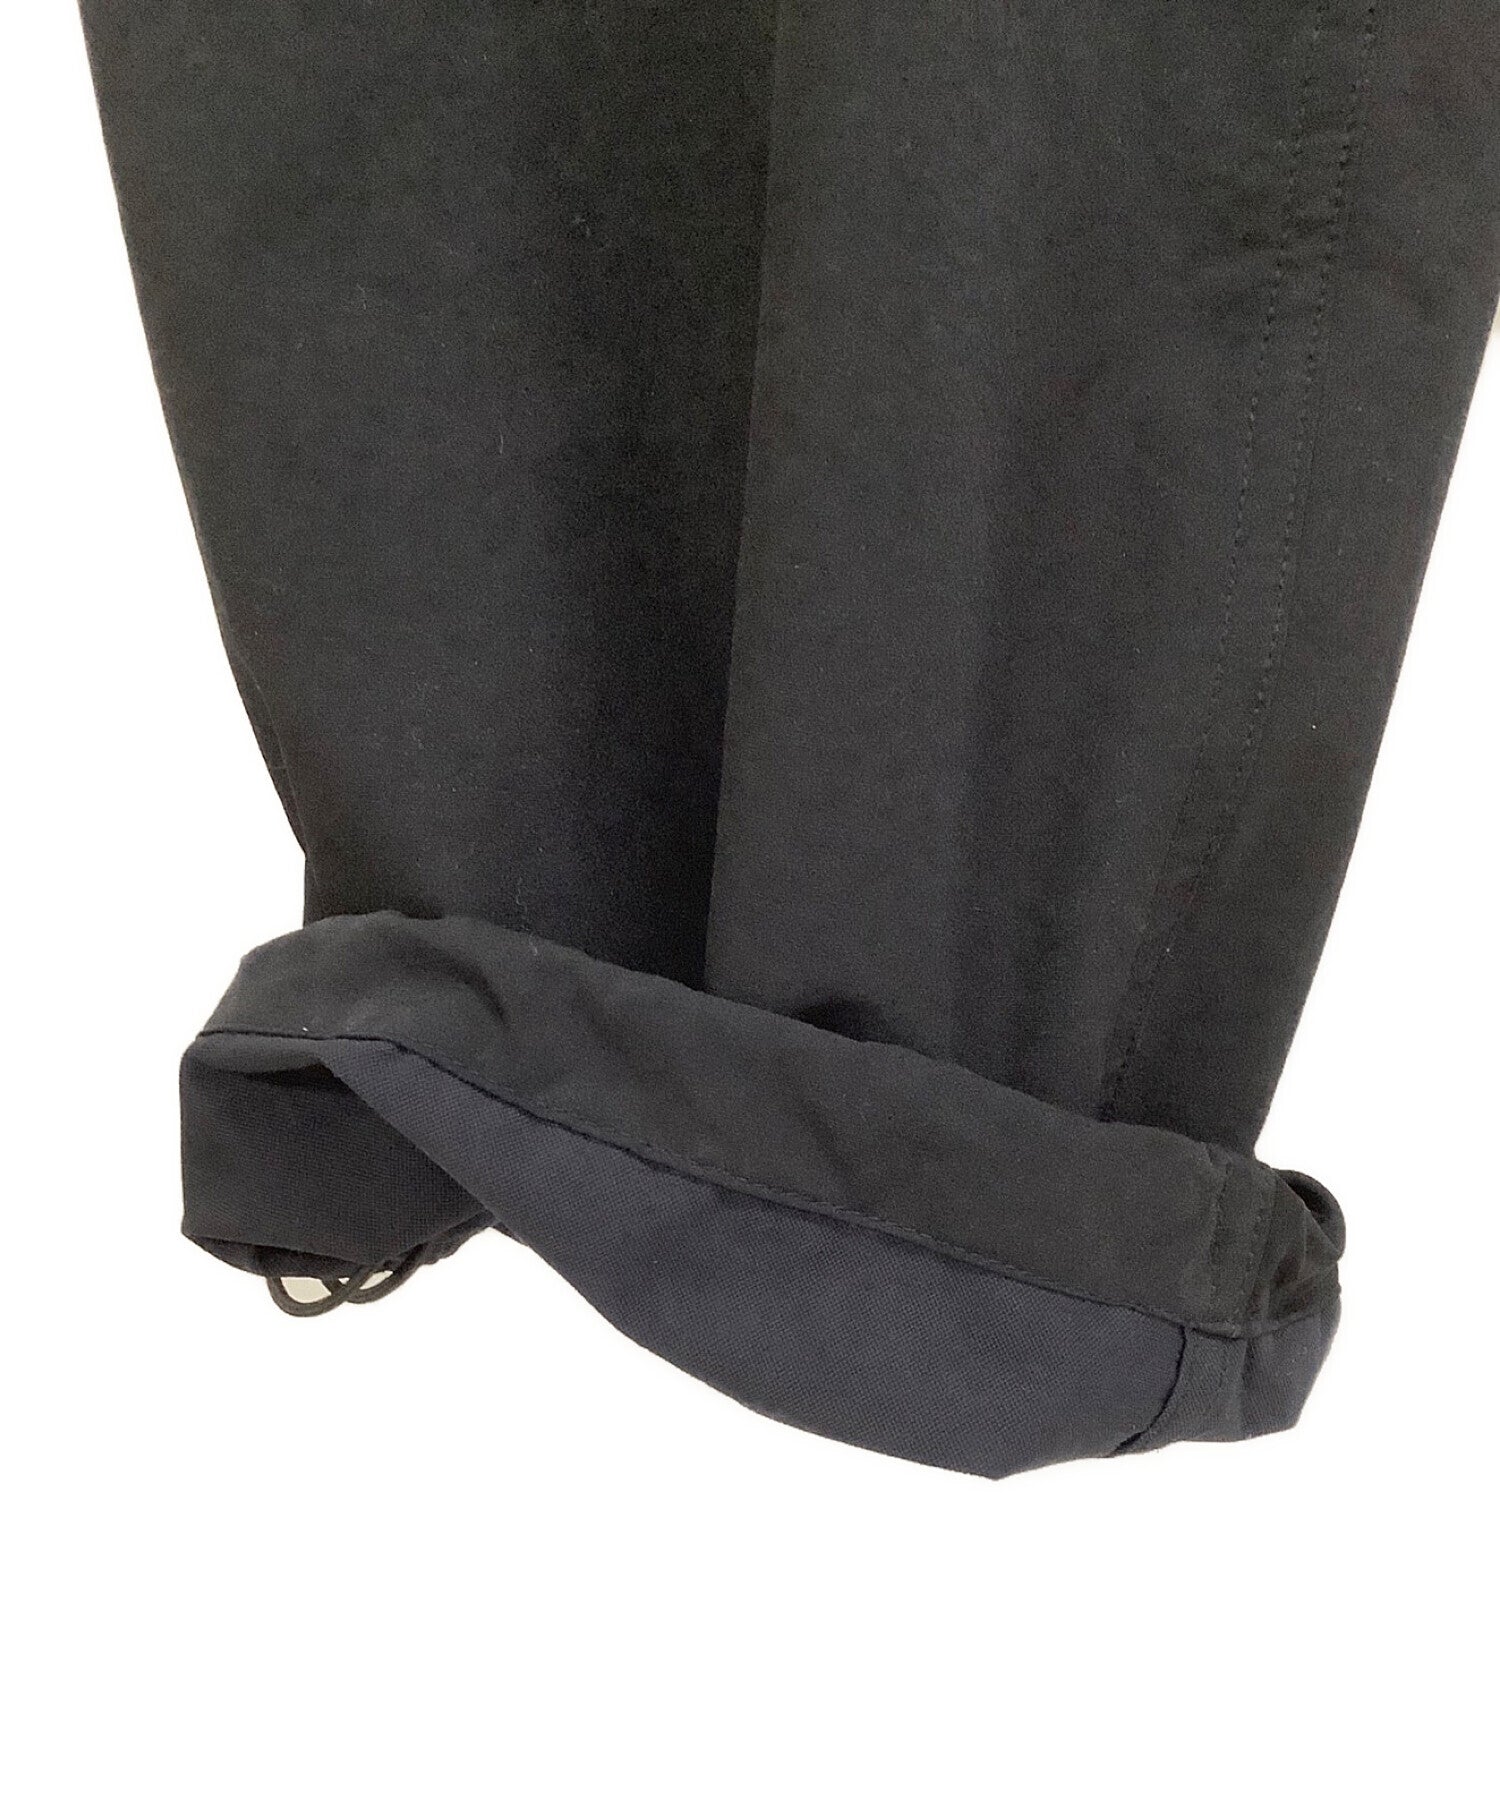 DAIWA PIER loose fitting pants with an elastic or drawcord waist